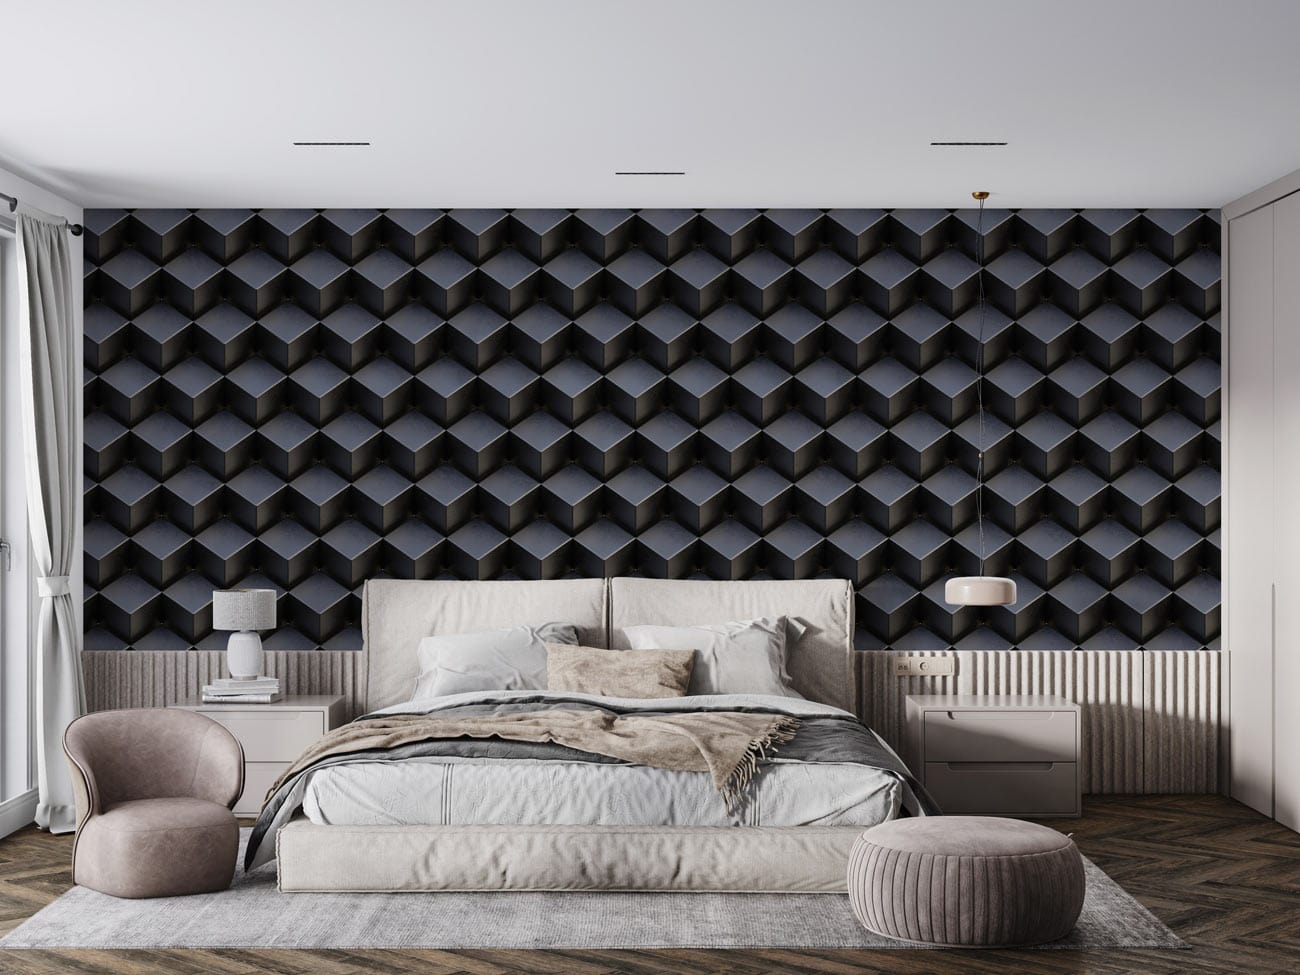 the bedroom is decorated with a metallic wallpaper effect